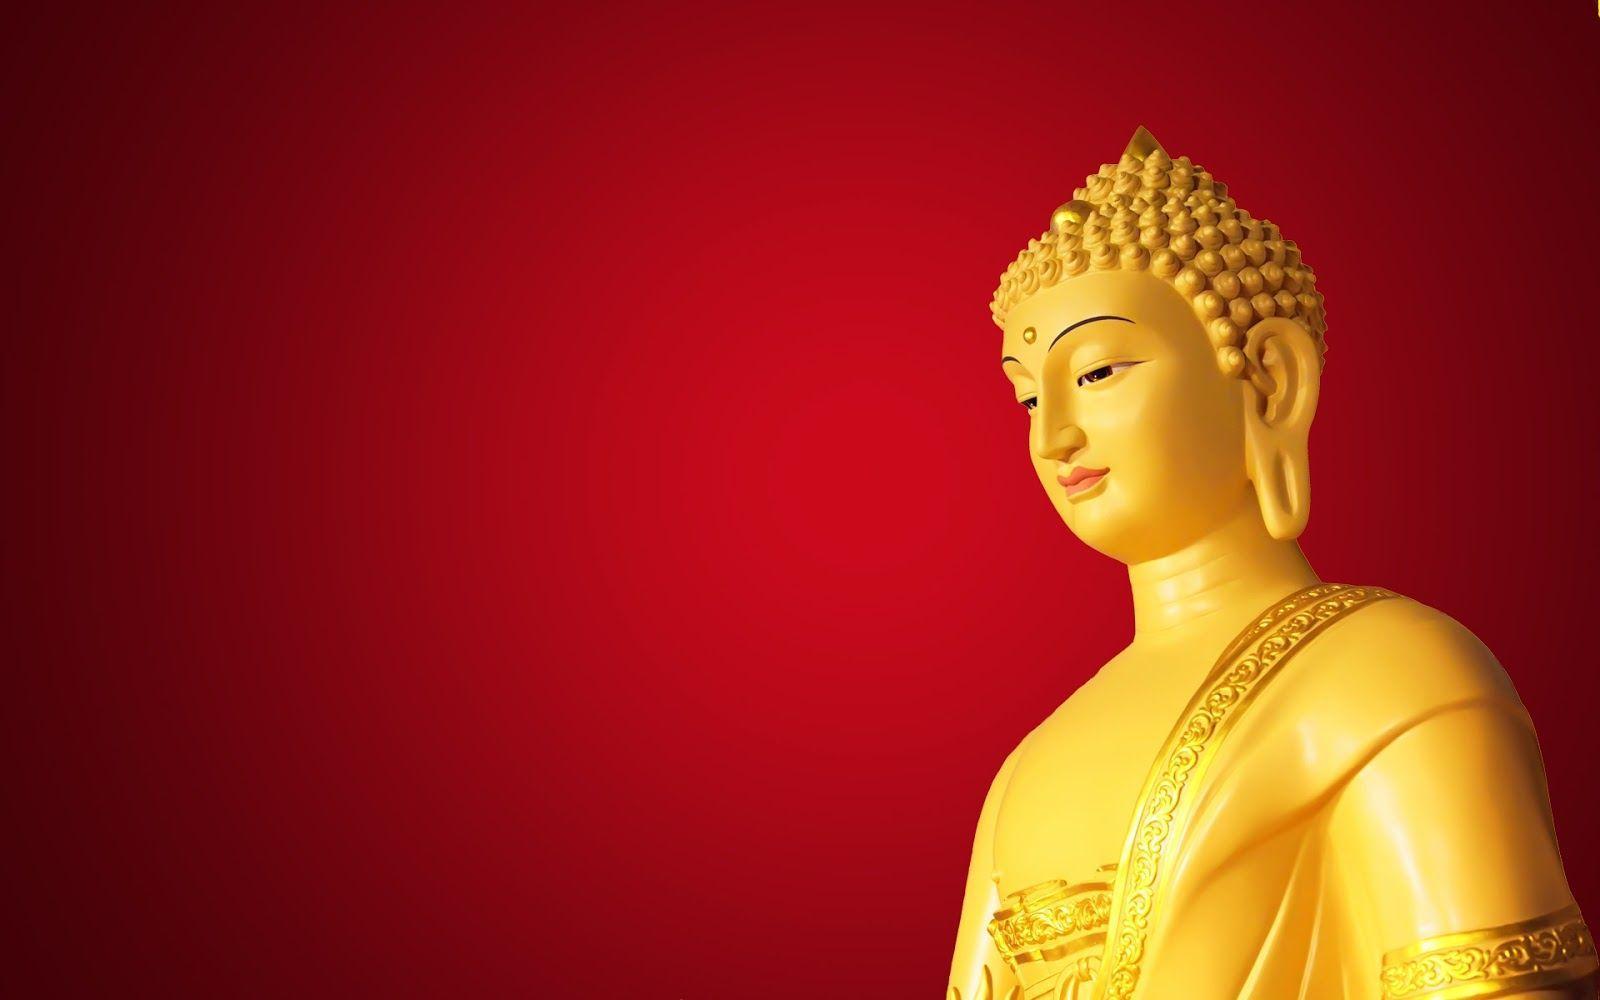 Letest Lord Buddha Picture Full HD Wallpaper ou can make